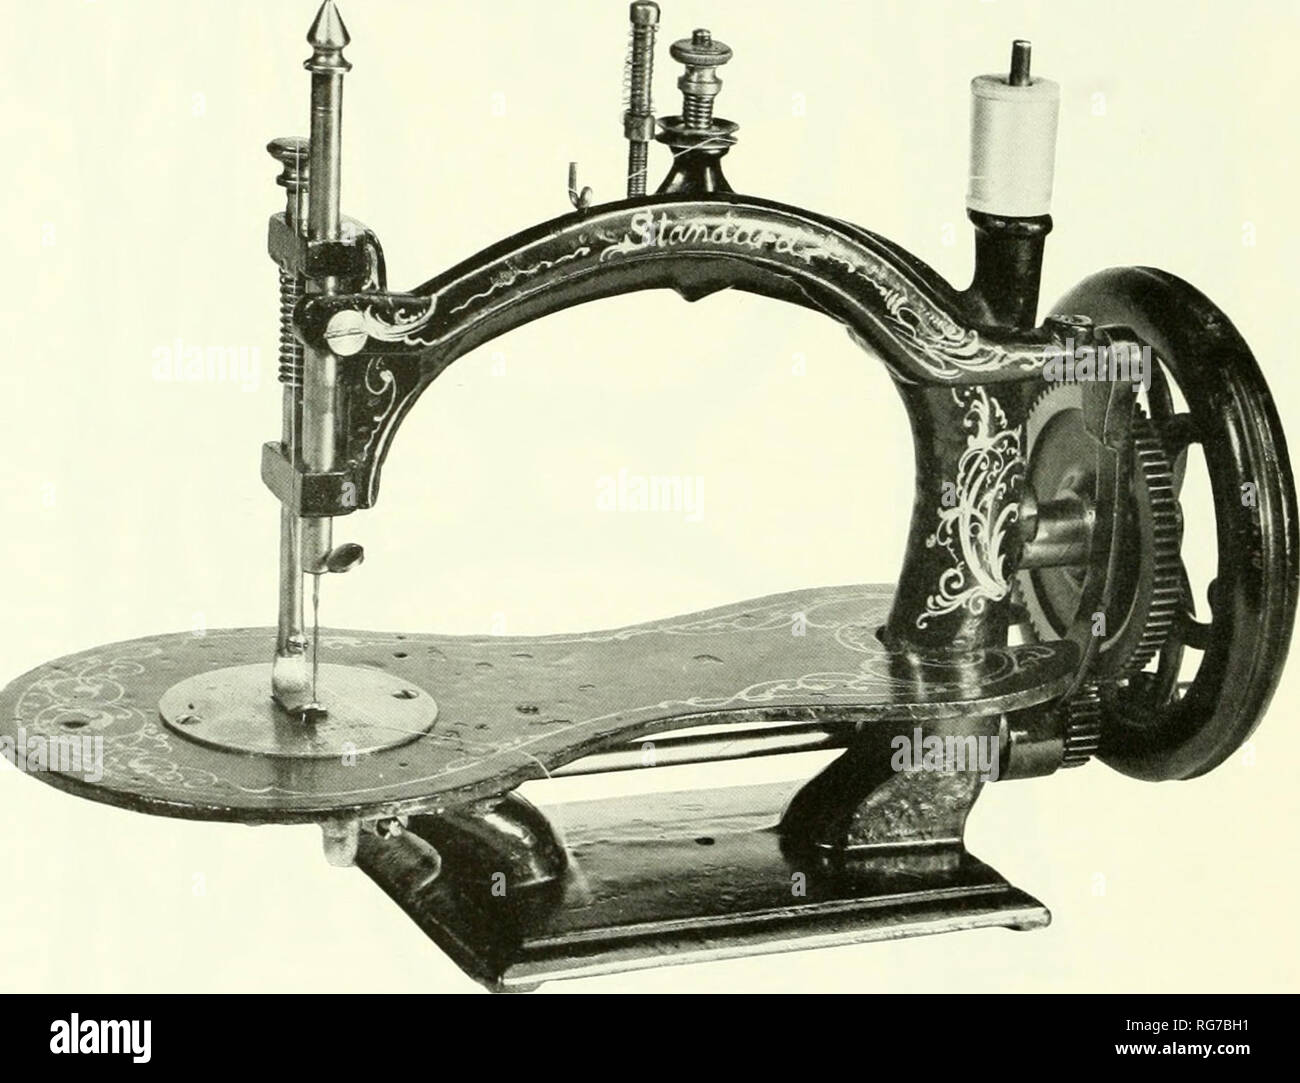 . Bulletin - United States National Museum. Science. Figure 123.—Standard sewing machine of about 1870. This chainstitch machine is believed to have been made by the company that later became the Standard Shuttle Sewing Machine Company, when they began manufactur- ing lockstitch machines about 1874. This machine is marked with the name, &quot;Standard,&quot; and with the dates ''Patented July 14, 1870, Patented Jan. 22, 1856, Dec. 9, 1856, Dec. 12, 1865.&quot; The dates refer to the reissue and extended reissue of the Bachelder and the A. B. Wilson patents. The number of chain- stitch machines Stock Photo